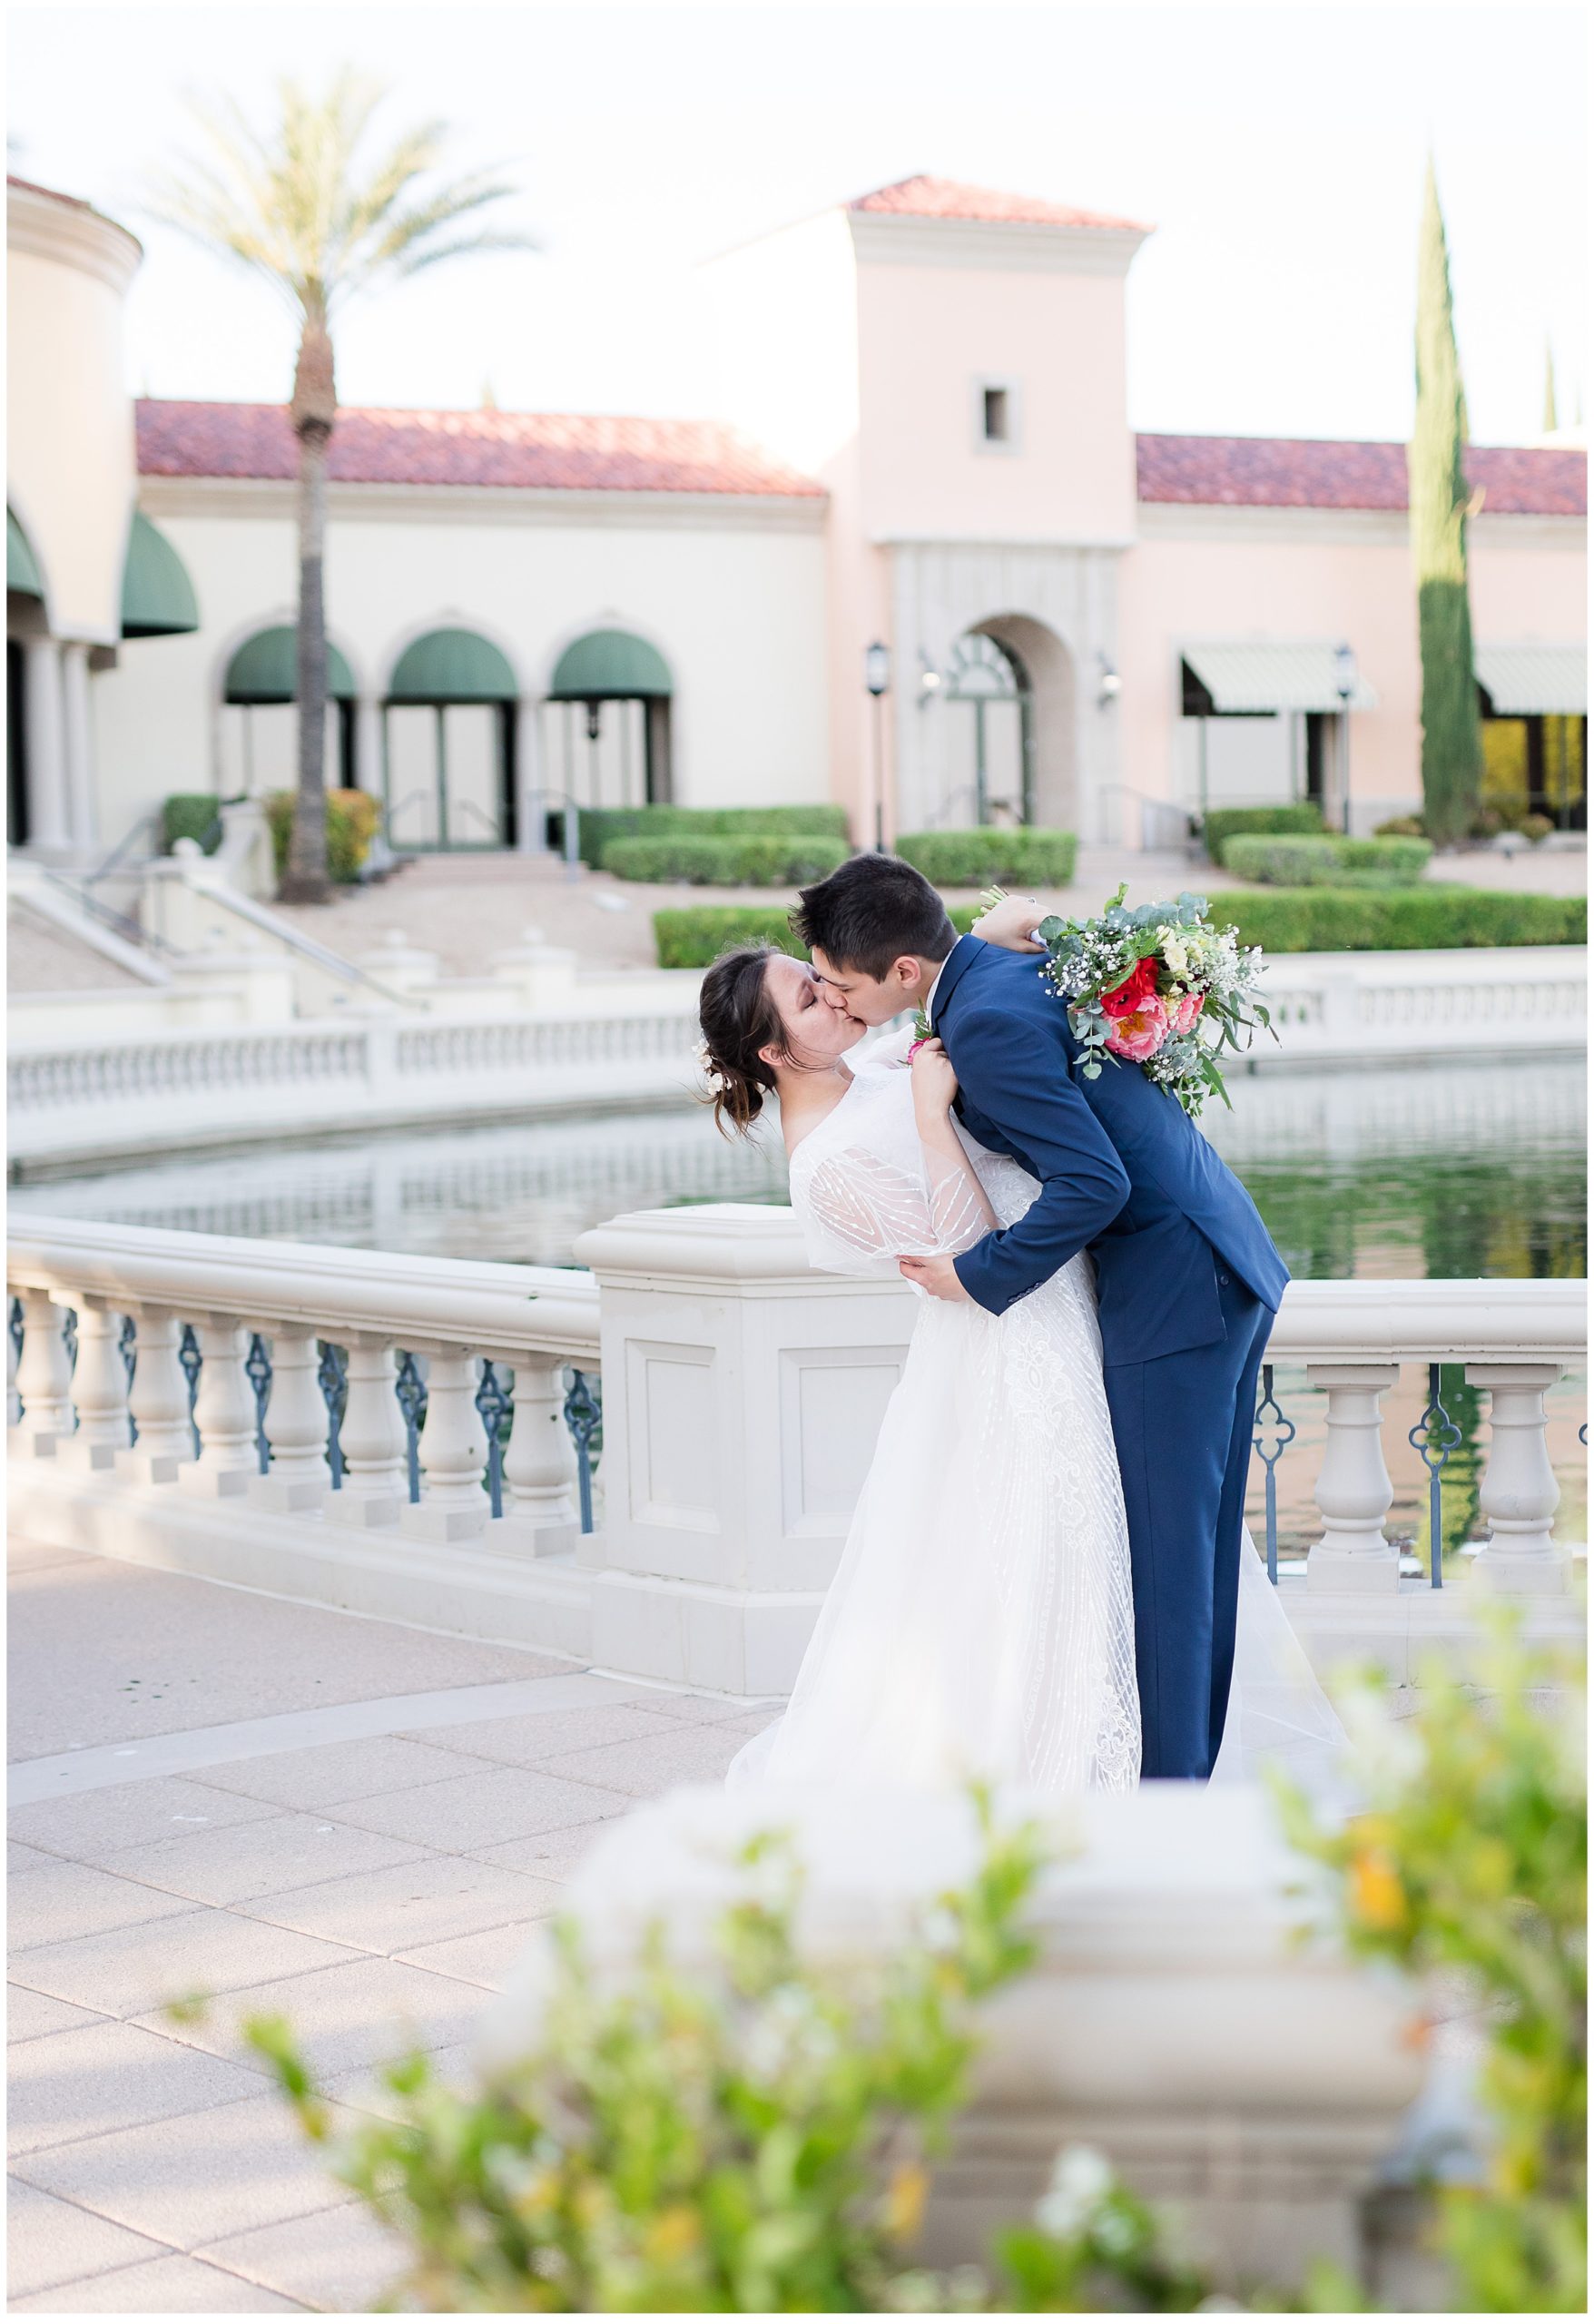 LAS VEGAS TEMPLE WEDDING sealed with a kiss